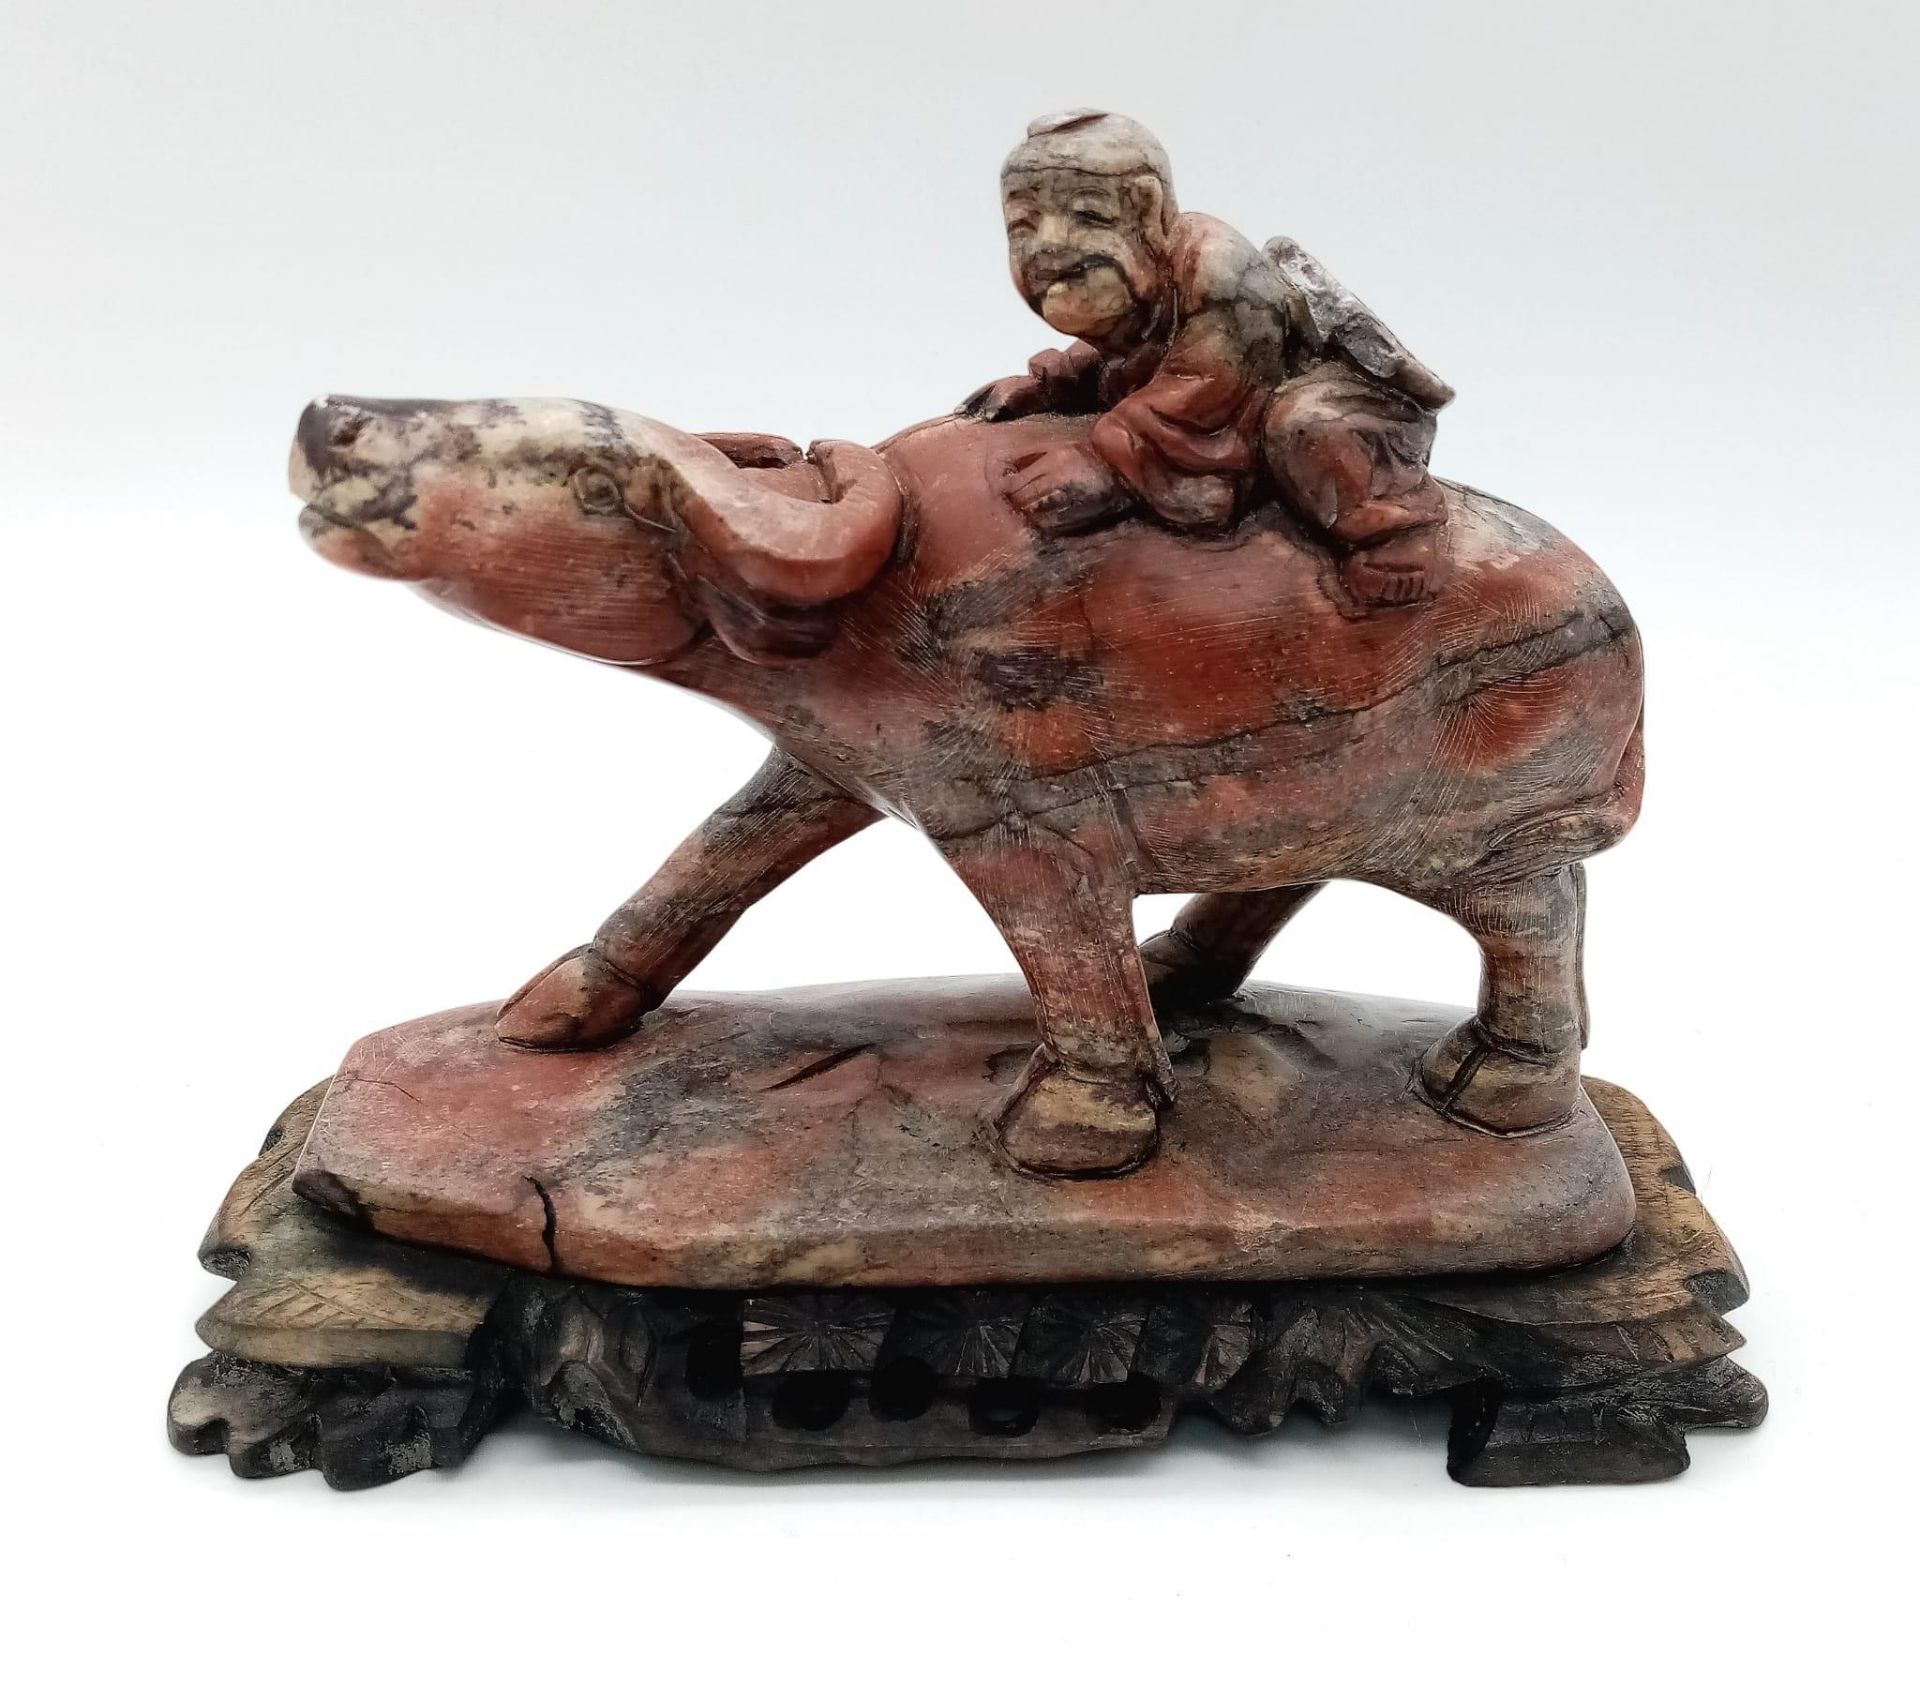 A wonderful Hardstone Chinese Antique Figure on a wooden base. Lovely red, grey and white colours in